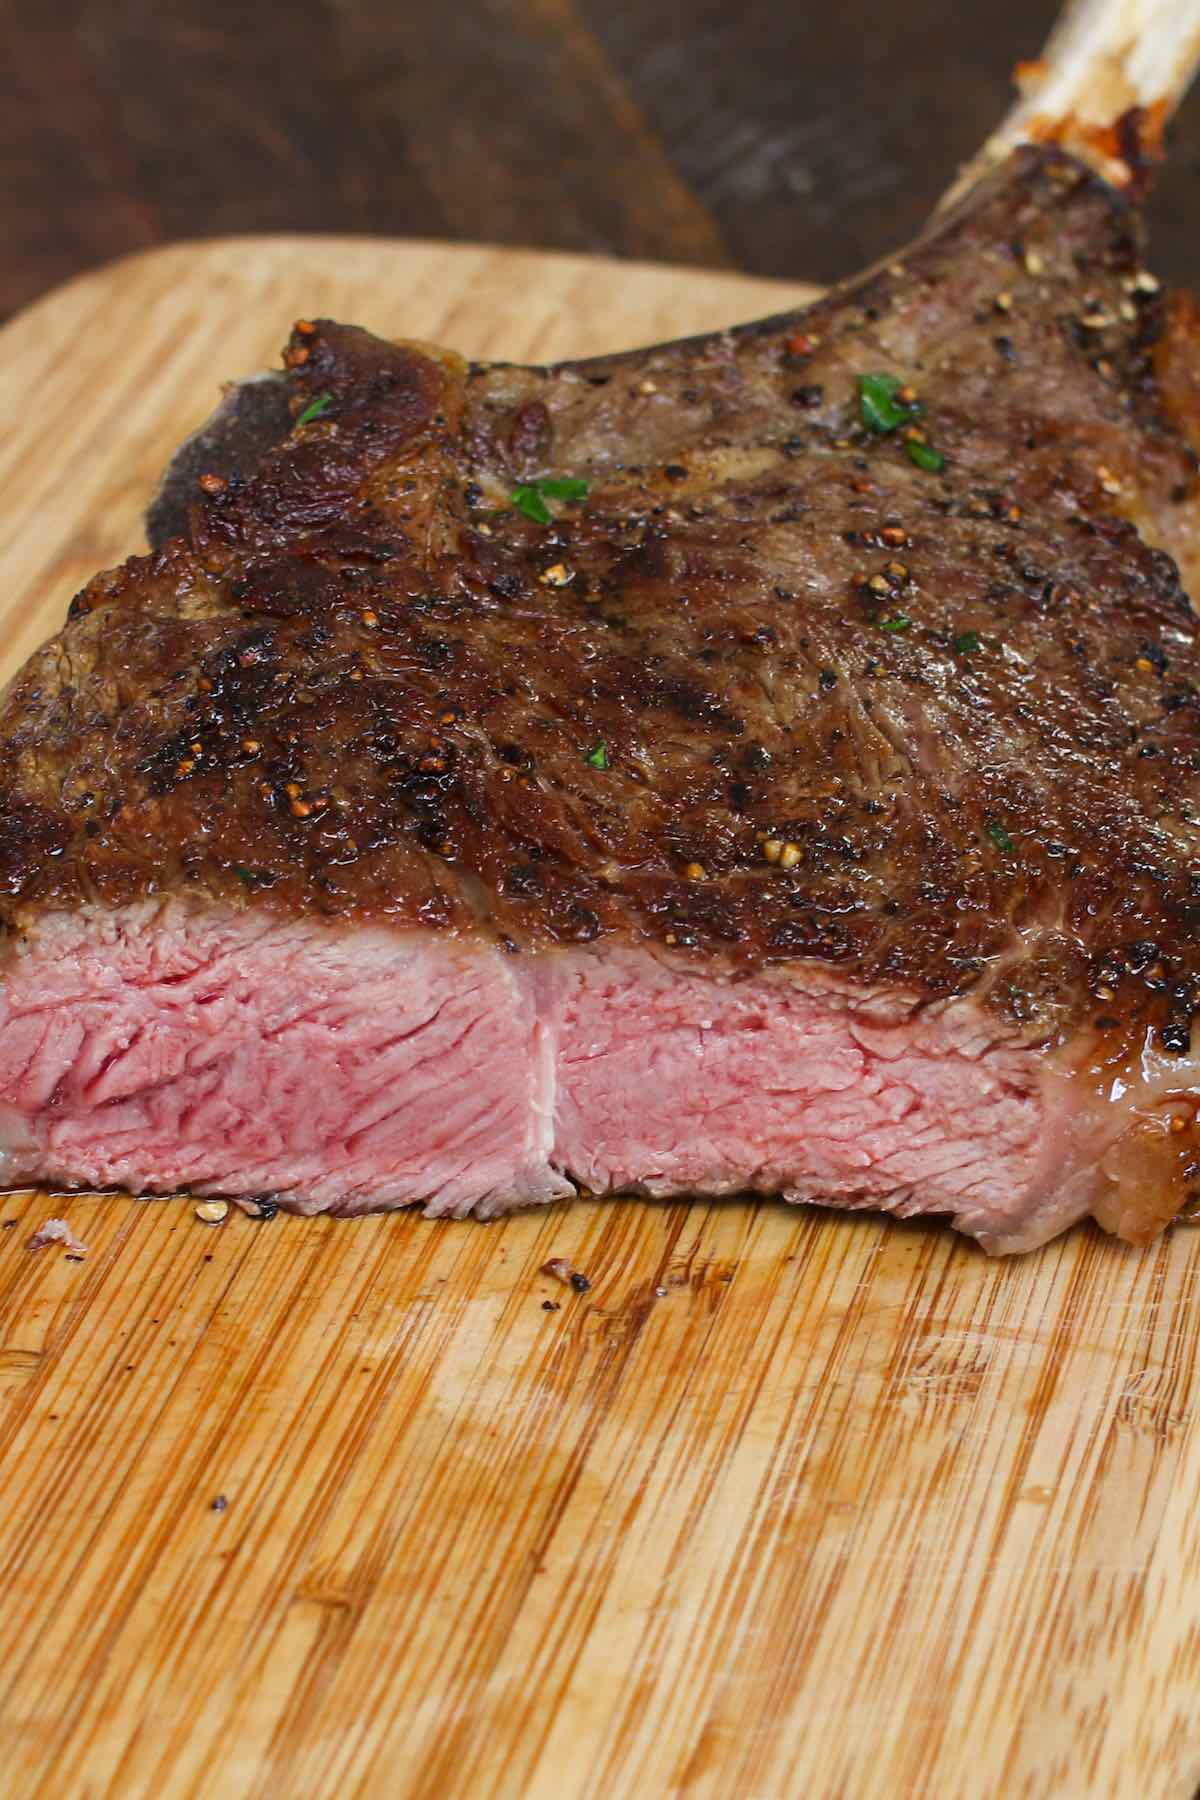 A cowboy ribeye cooked medium showing a pale pink interior